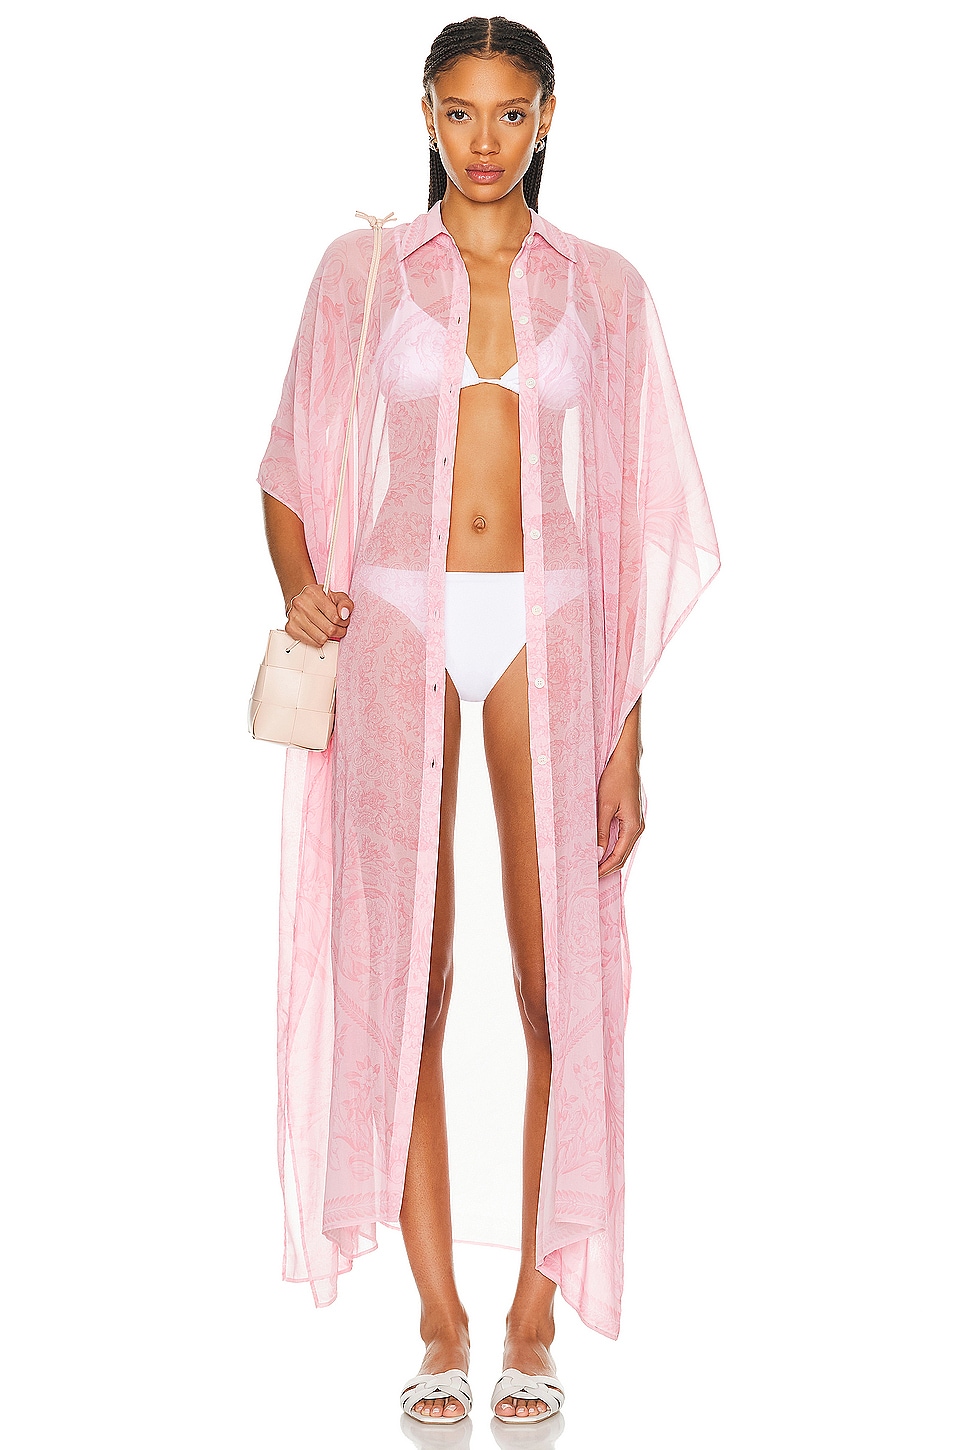 Image 1 of VERSACE Chiffon Robe Coverup Dress in Pale Pink